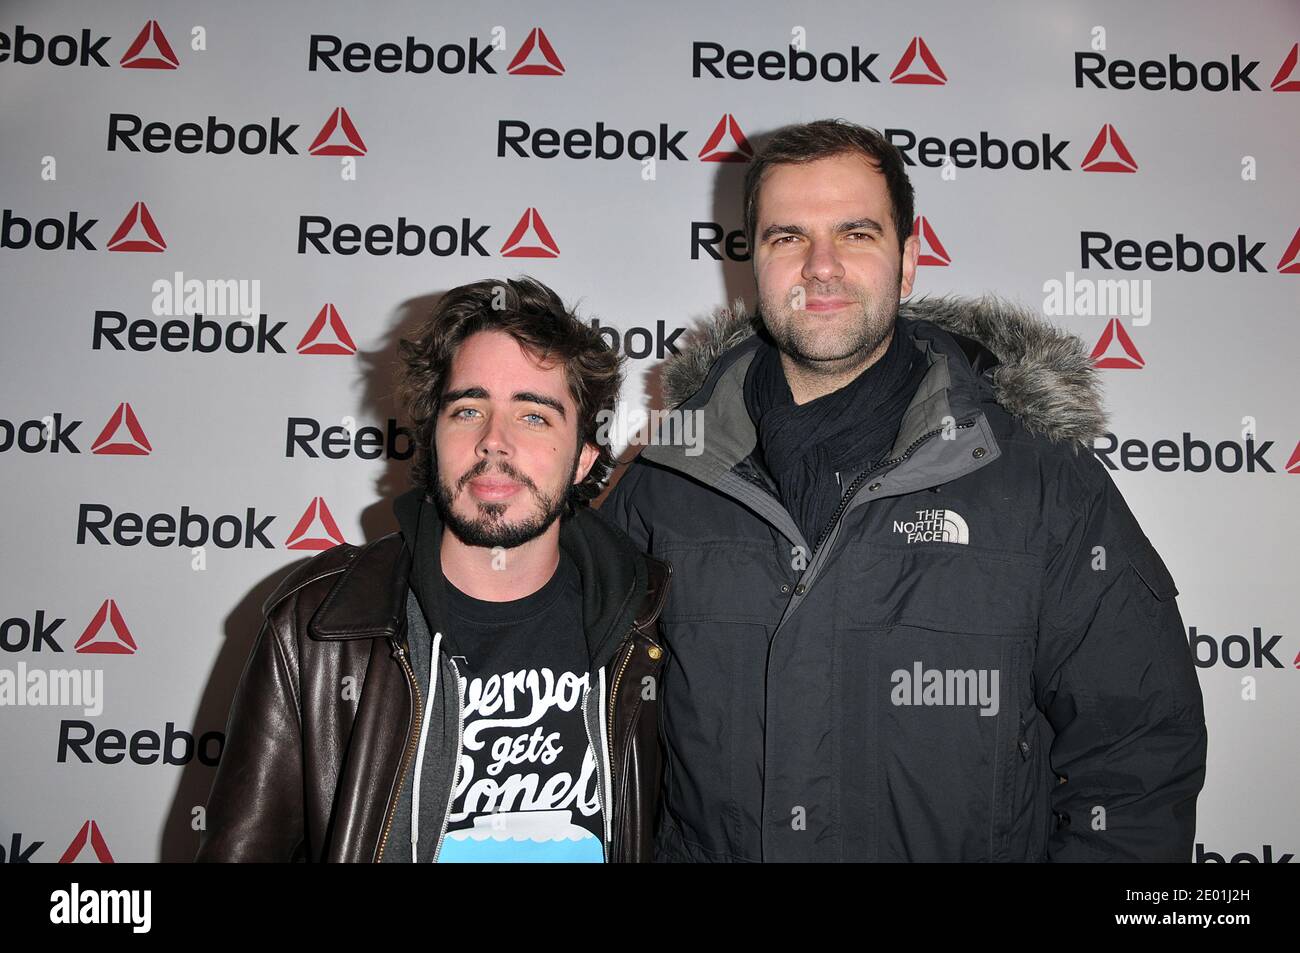 Quentin Margot et Eric Metzger attending the Reebok Concept Store Opening  event at Avenue de L'Opera in Paris, France on December 4, 2013. Photo by  Thierry Plessis/ABACAPRESS.COM Stock Photo - Alamy